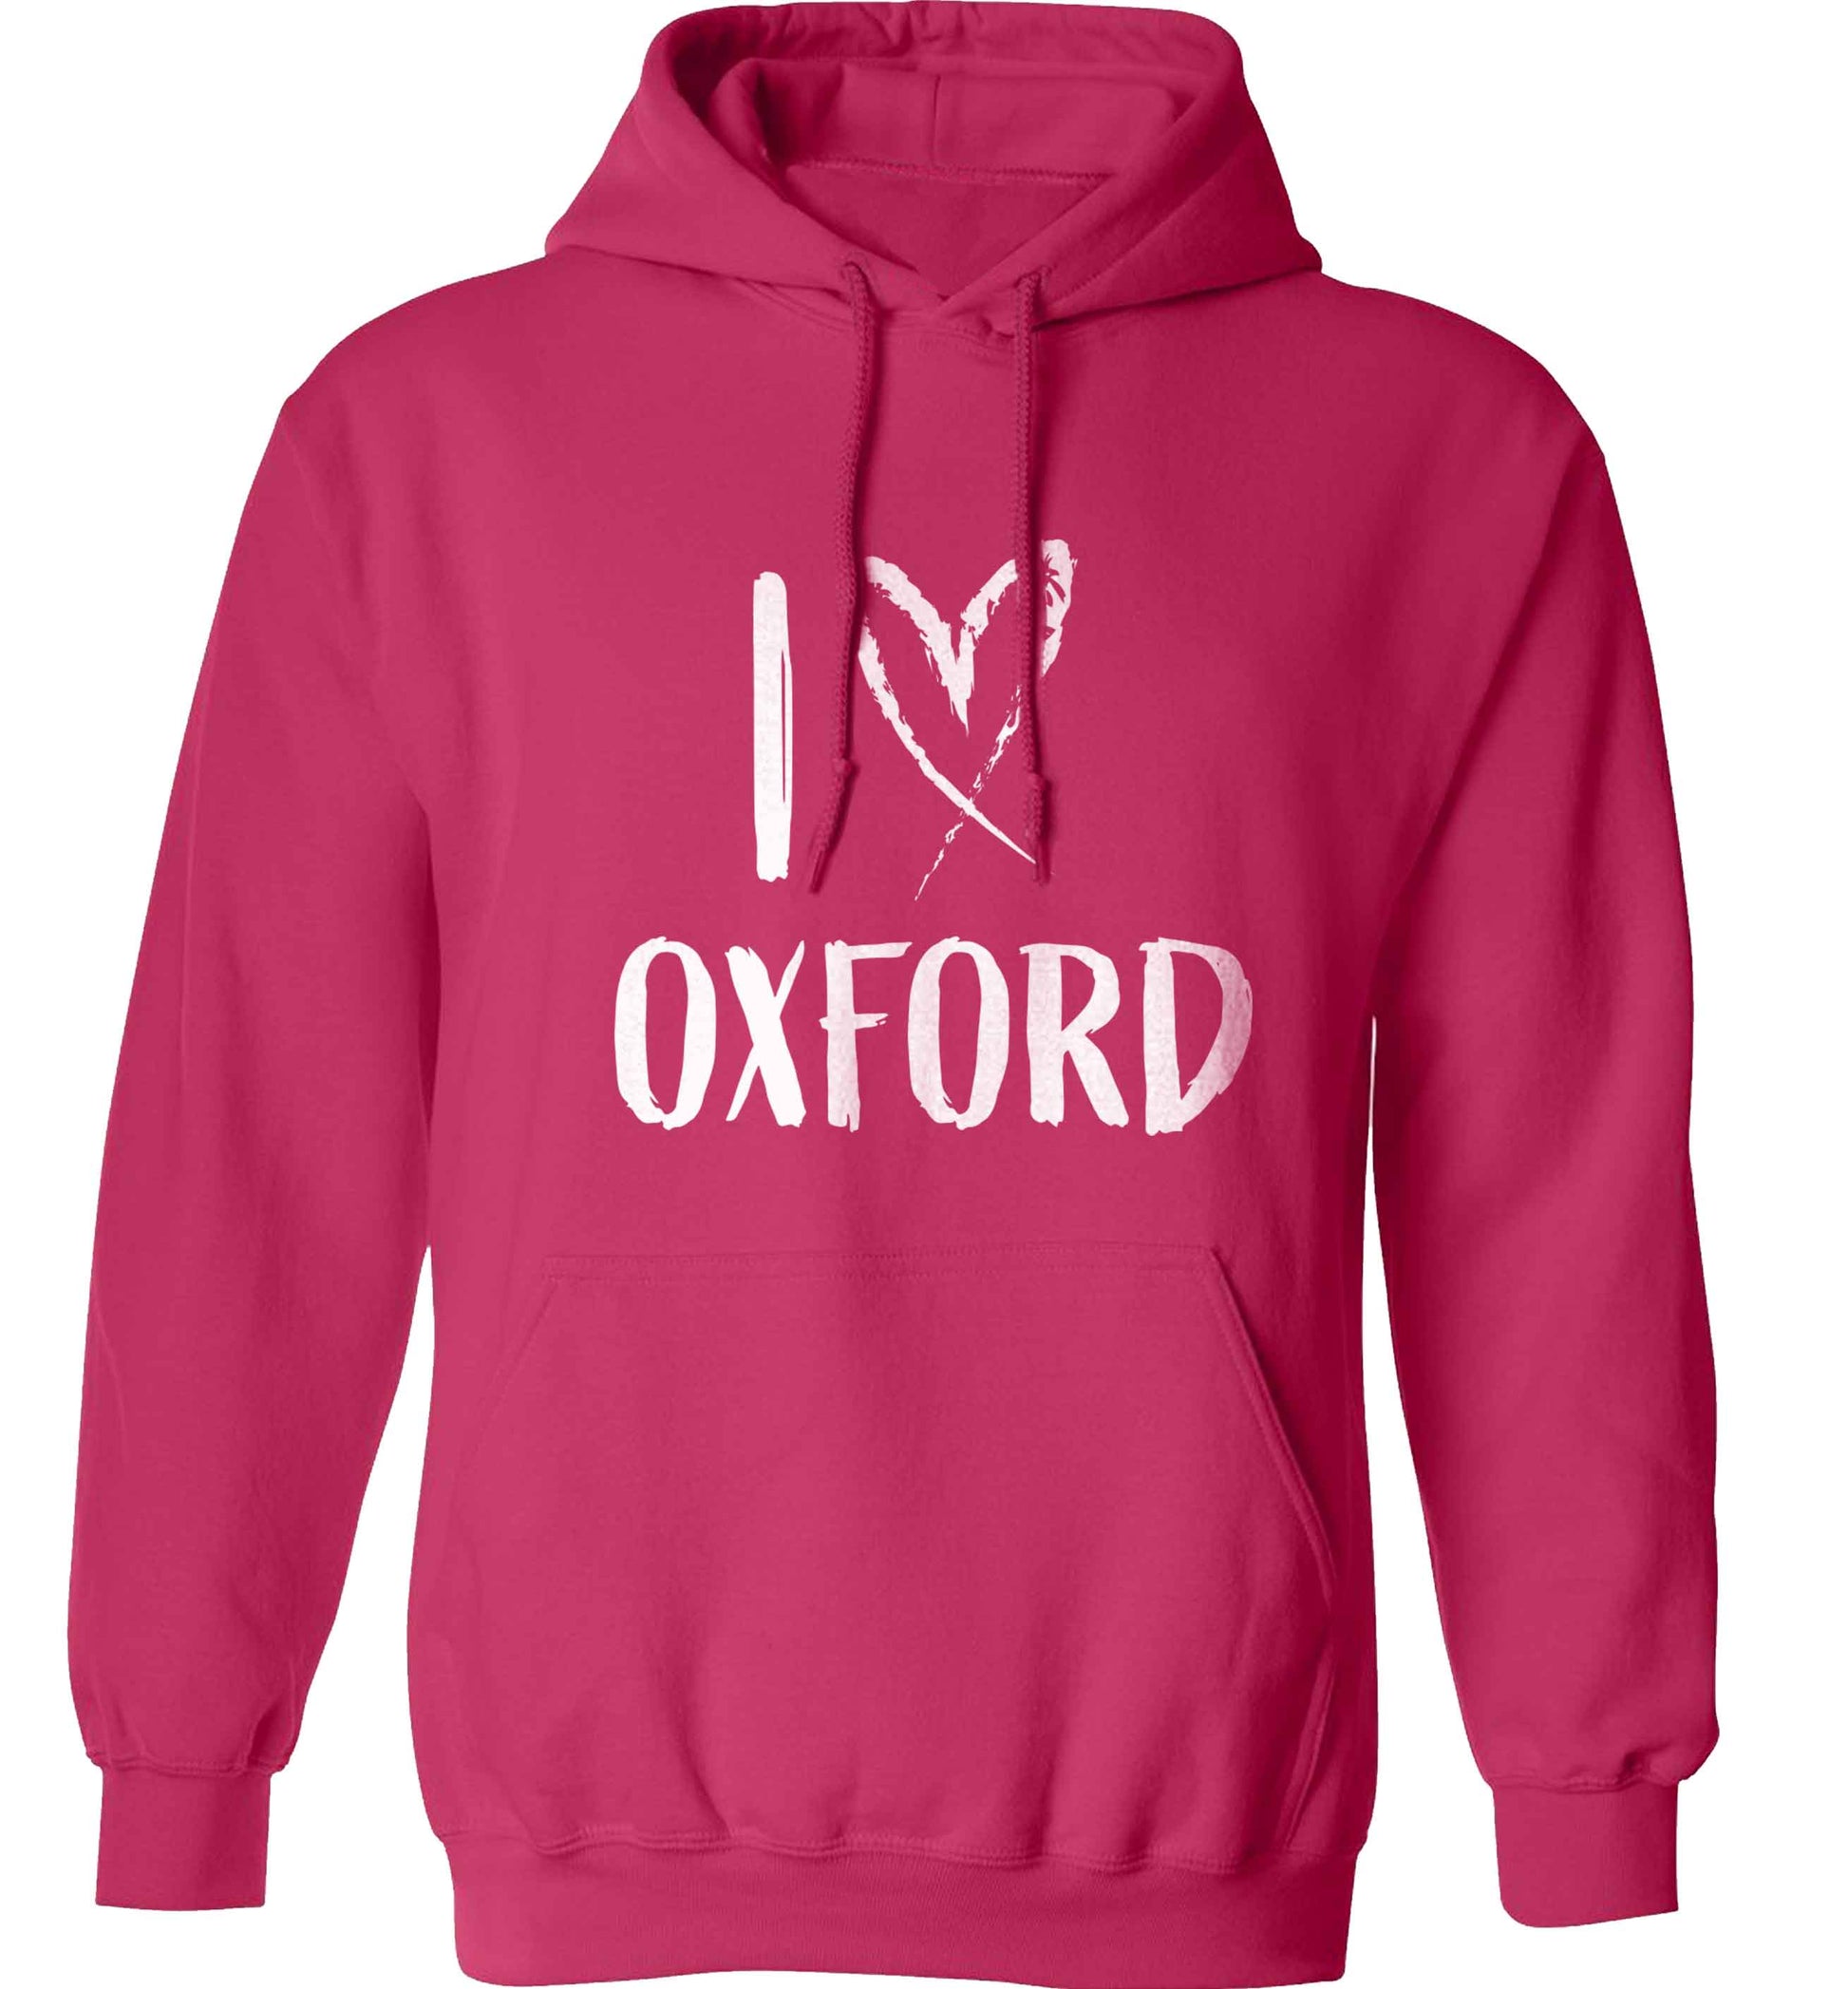 I love Oxford adults unisex pink hoodie 2XL